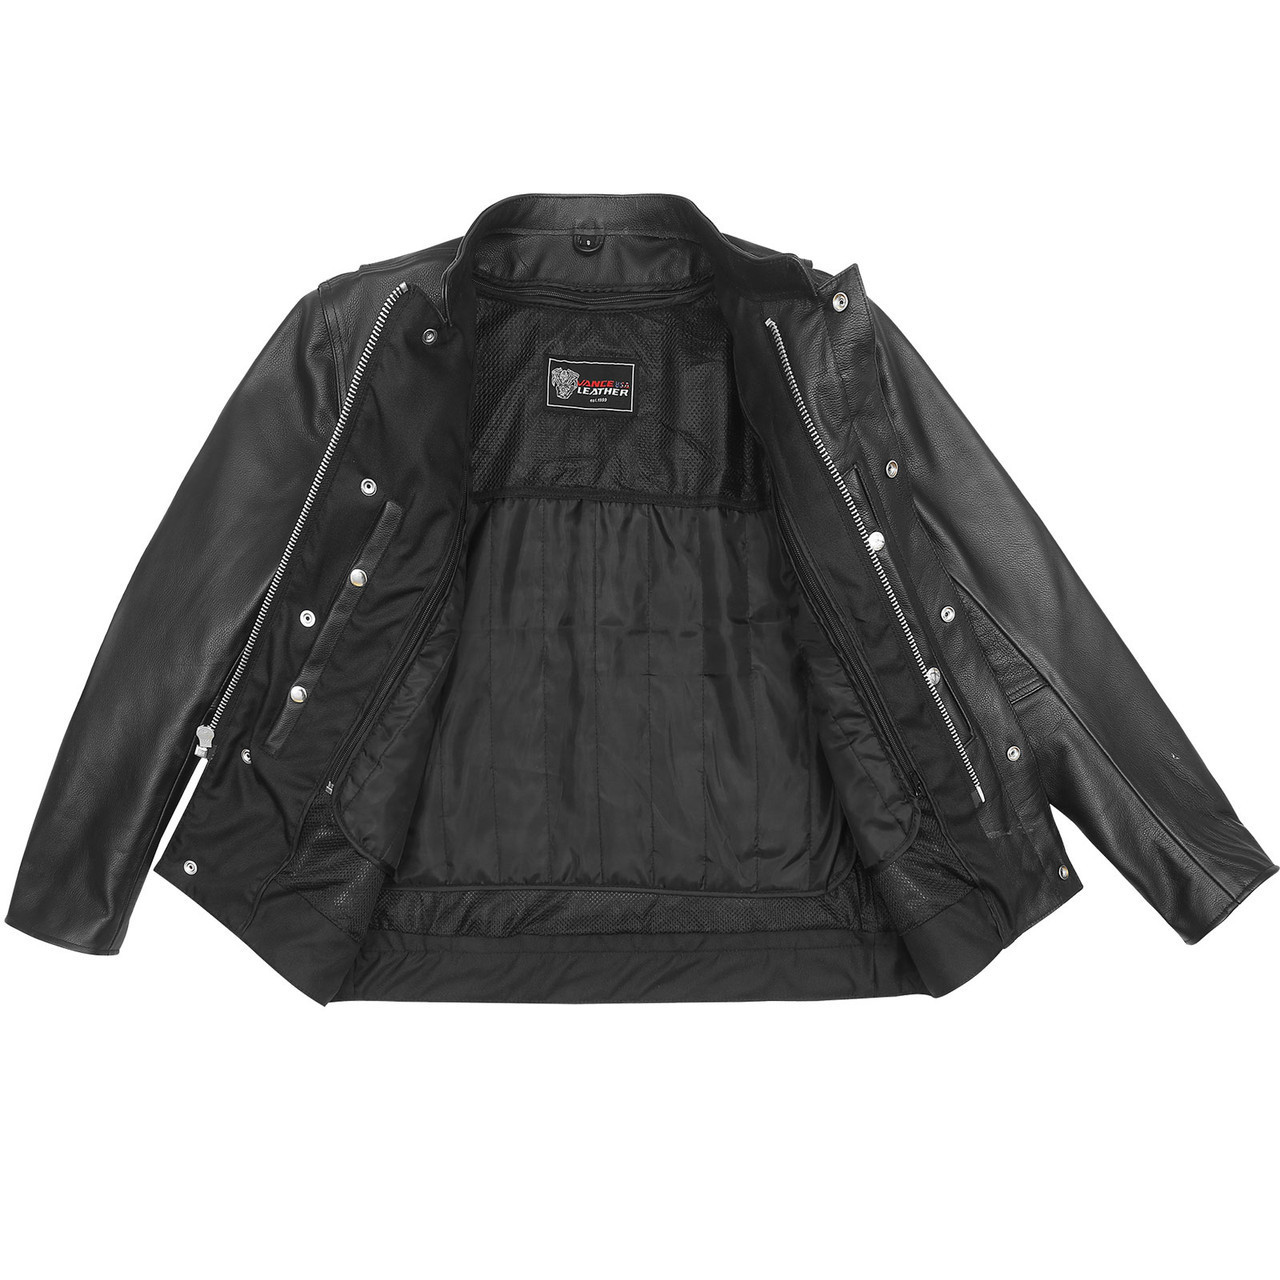 RoyalEnfield Explorer V3 Riding Jacket | The Royal Enfield Explorer V3 CE  Certified riding jacket represents the spirit of the brand in earnest.  Classic, versatile, better with every outing, it... | By